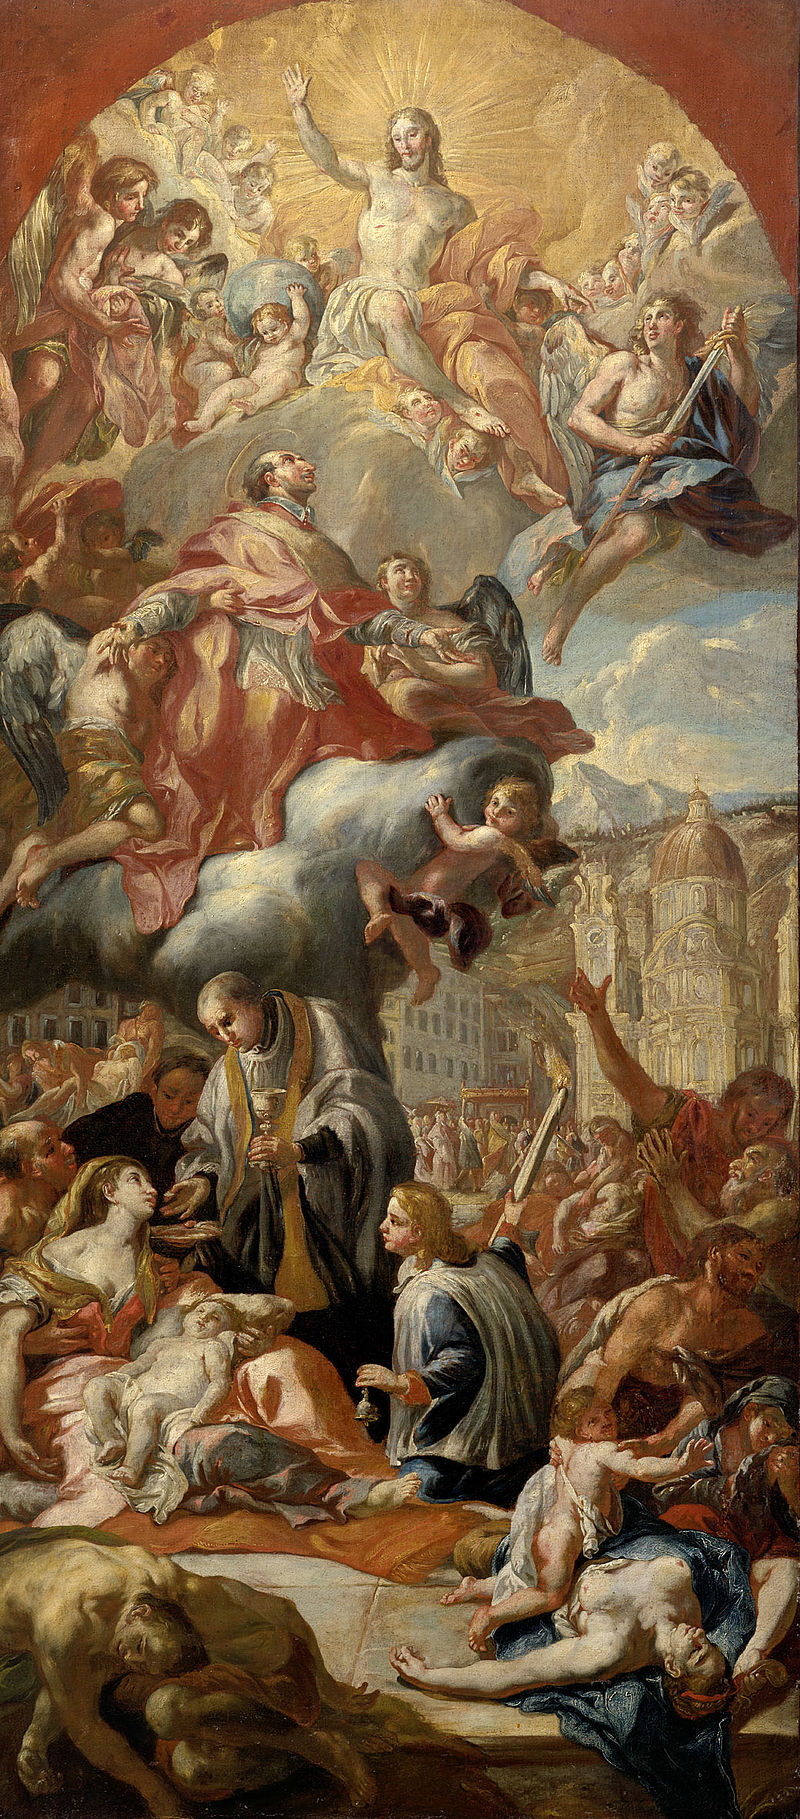 The Apotheosis of St Charles Borromeo (Sketch for the left side-altar painting in the Collegiate Church, Salzburg)